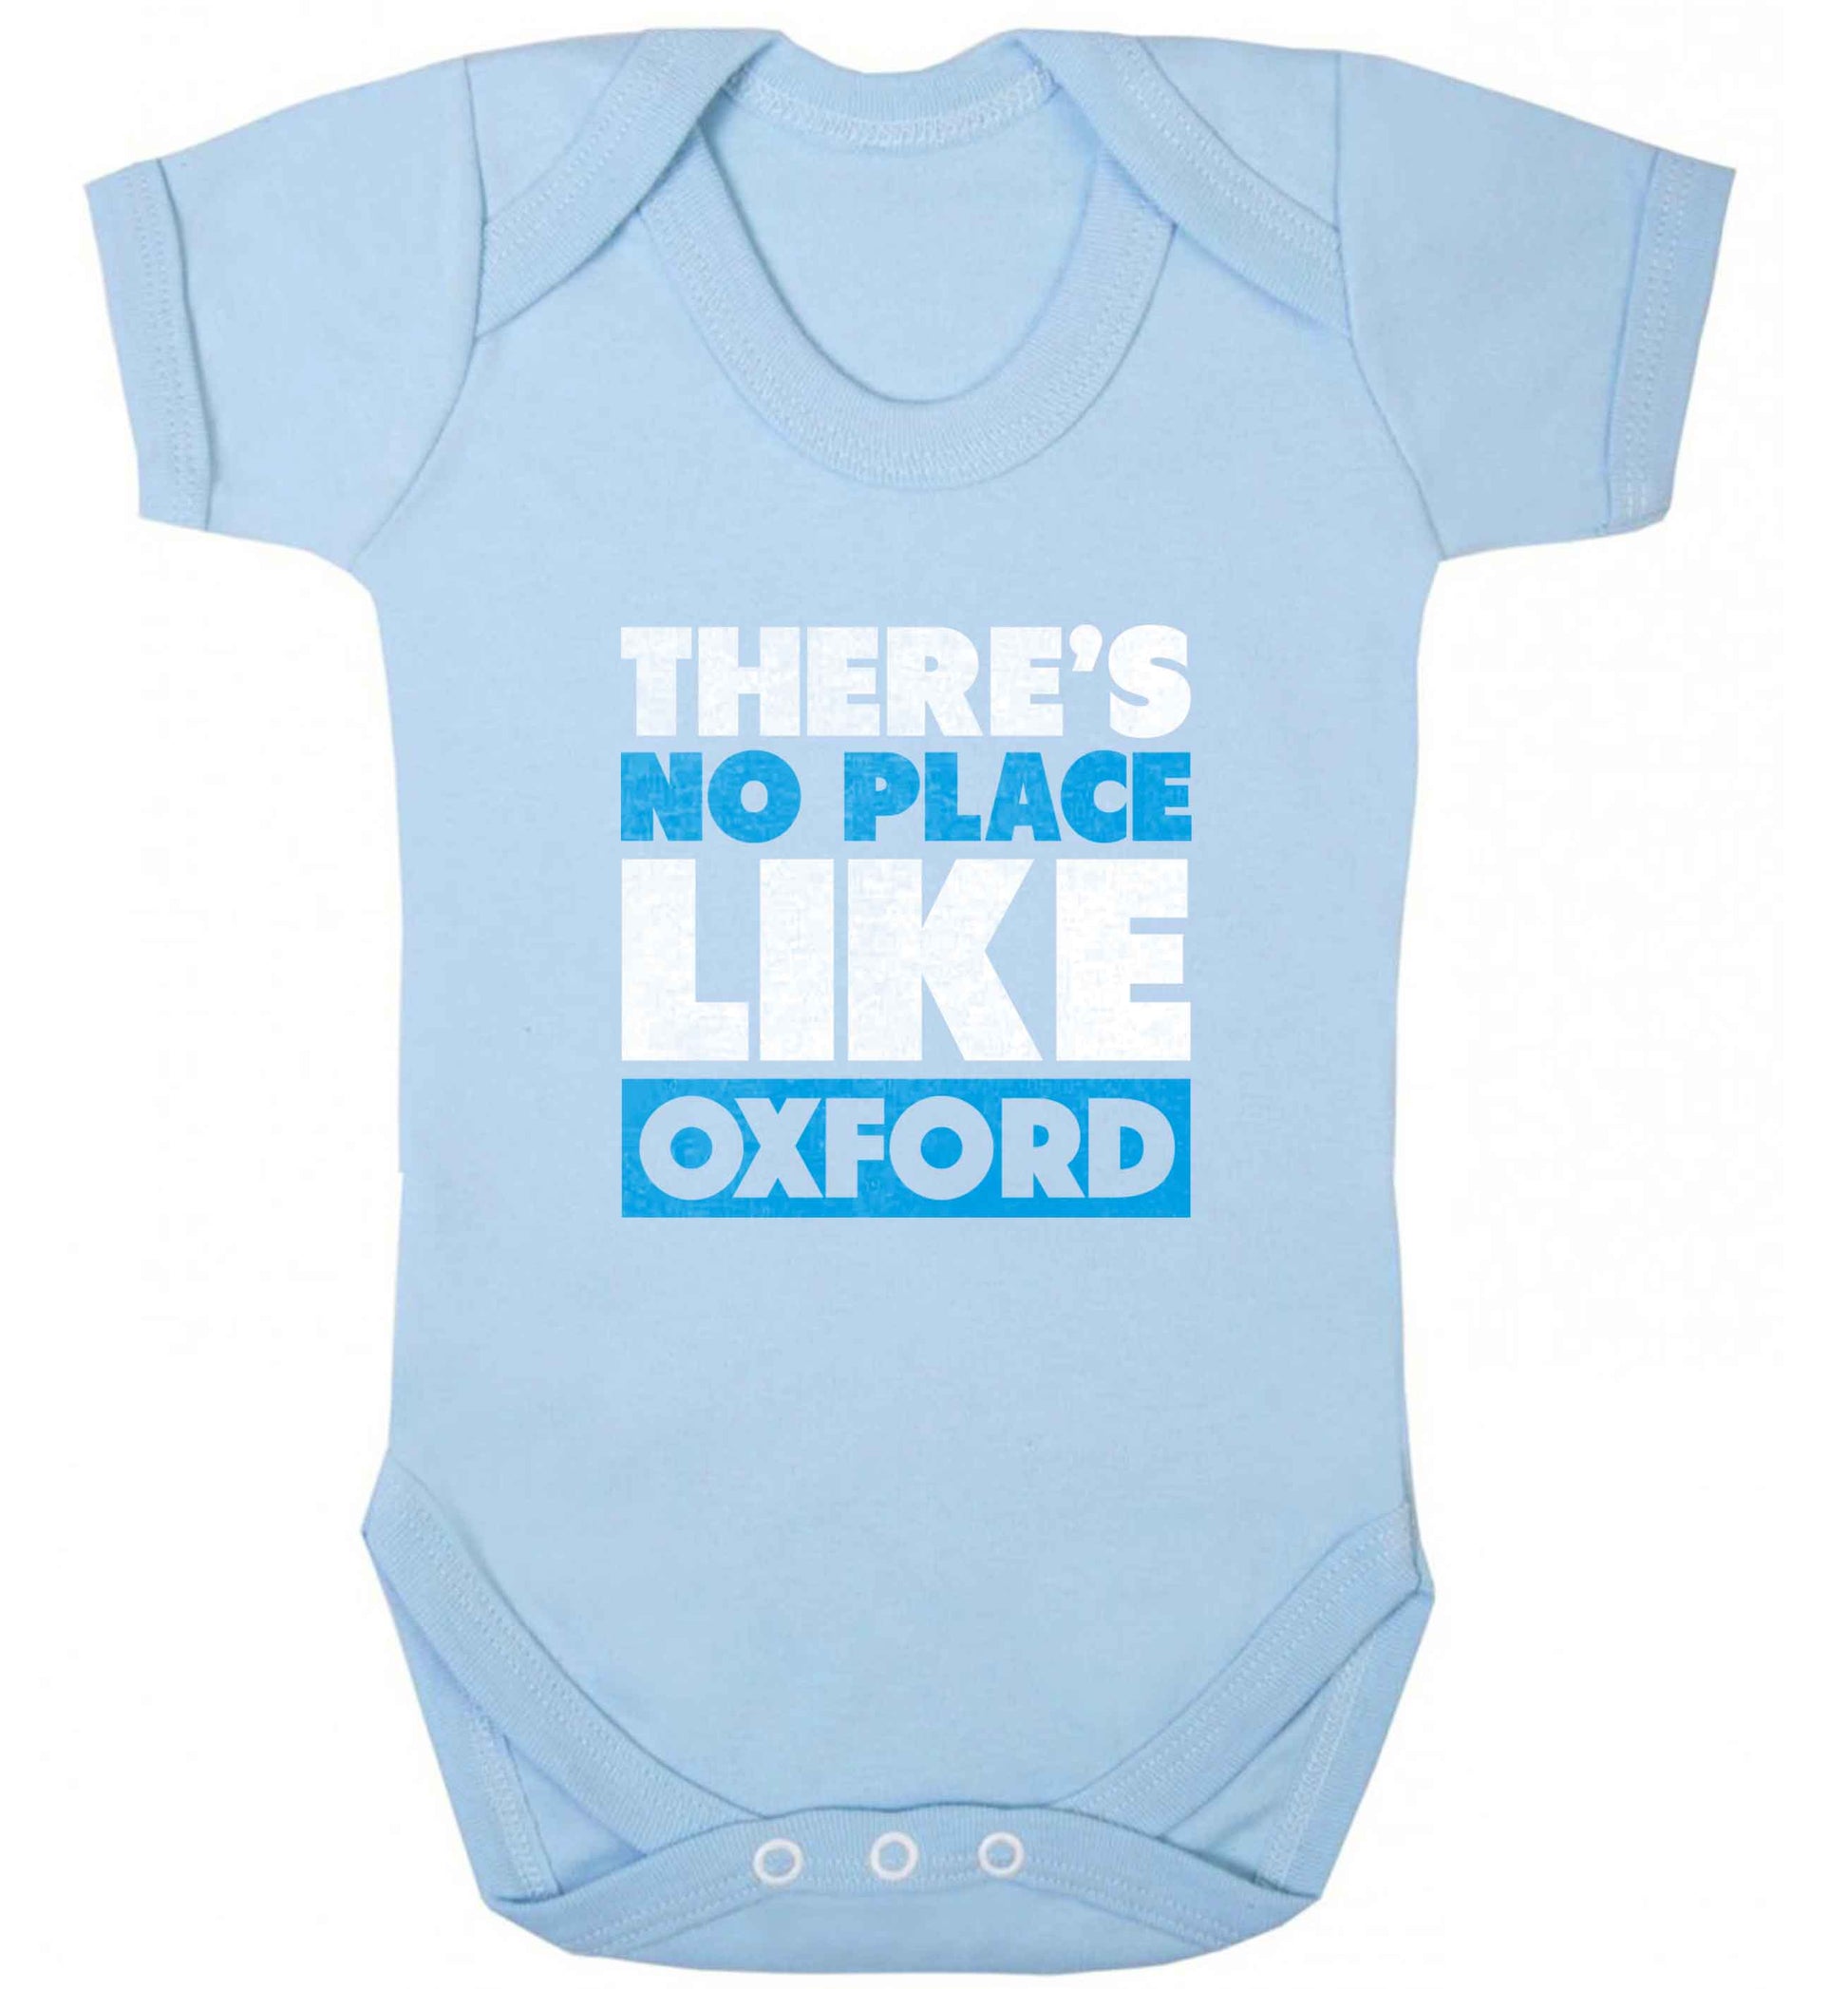 There's no place like Oxford baby vest pale blue 18-24 months